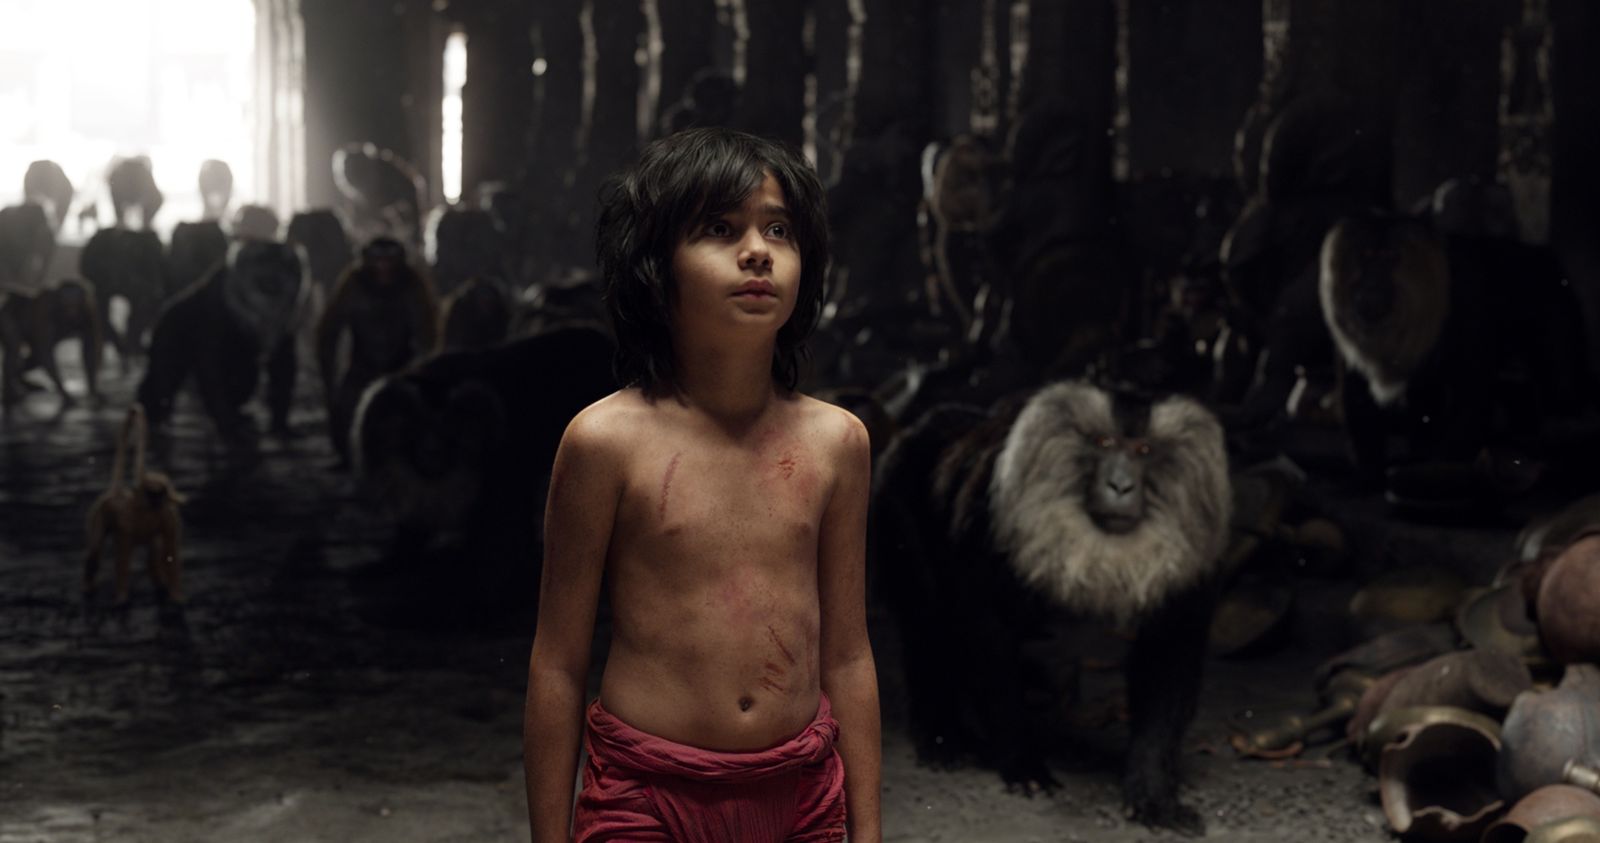 'The Jungle Book' Crossed Rs. 100 Crores On The Second Weekend!